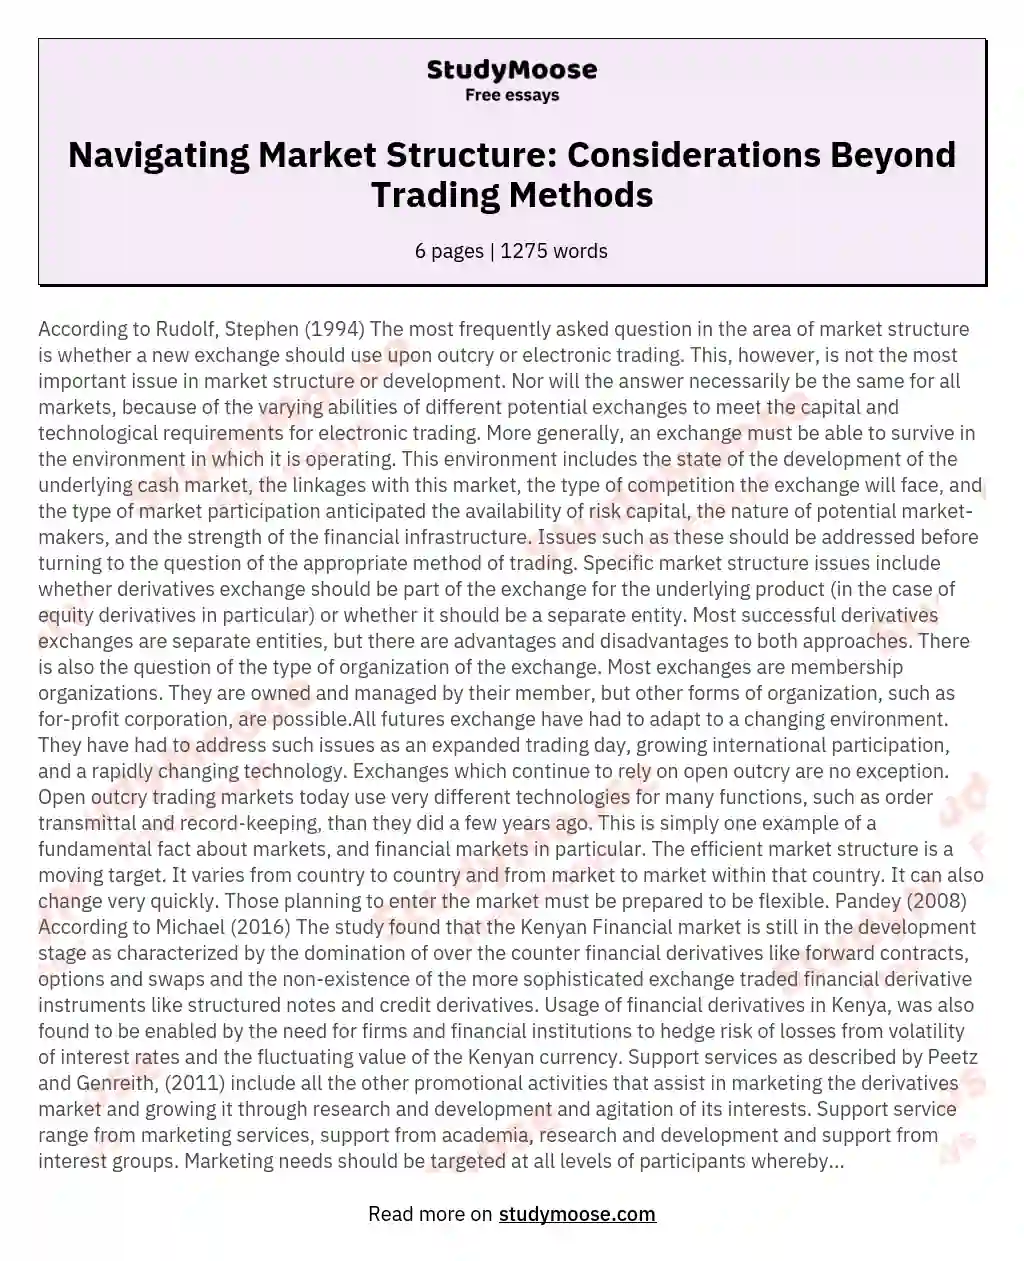 Navigating Market Structure: Considerations Beyond Trading Methods essay